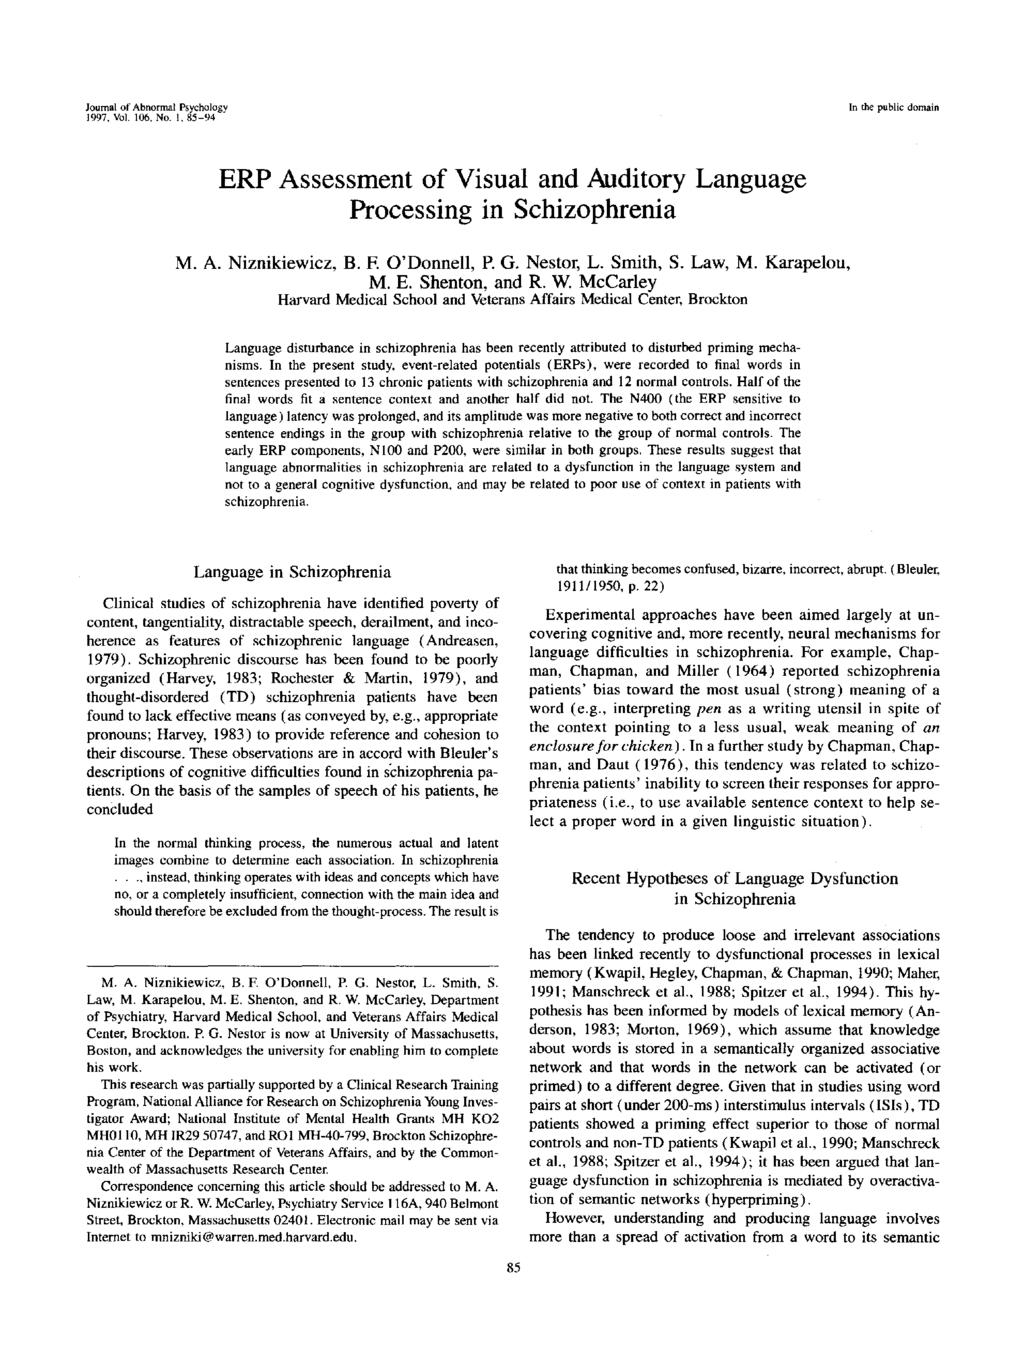 Journal of Abnormal Psychology 1997, Vol. 106, No. 1, 85-94 In the public domain ERP Assessment of Visual and Auditory Language Processing in Schizophrenia M. A. Niznikiewicz, B. F. O'Donnell, P. G.